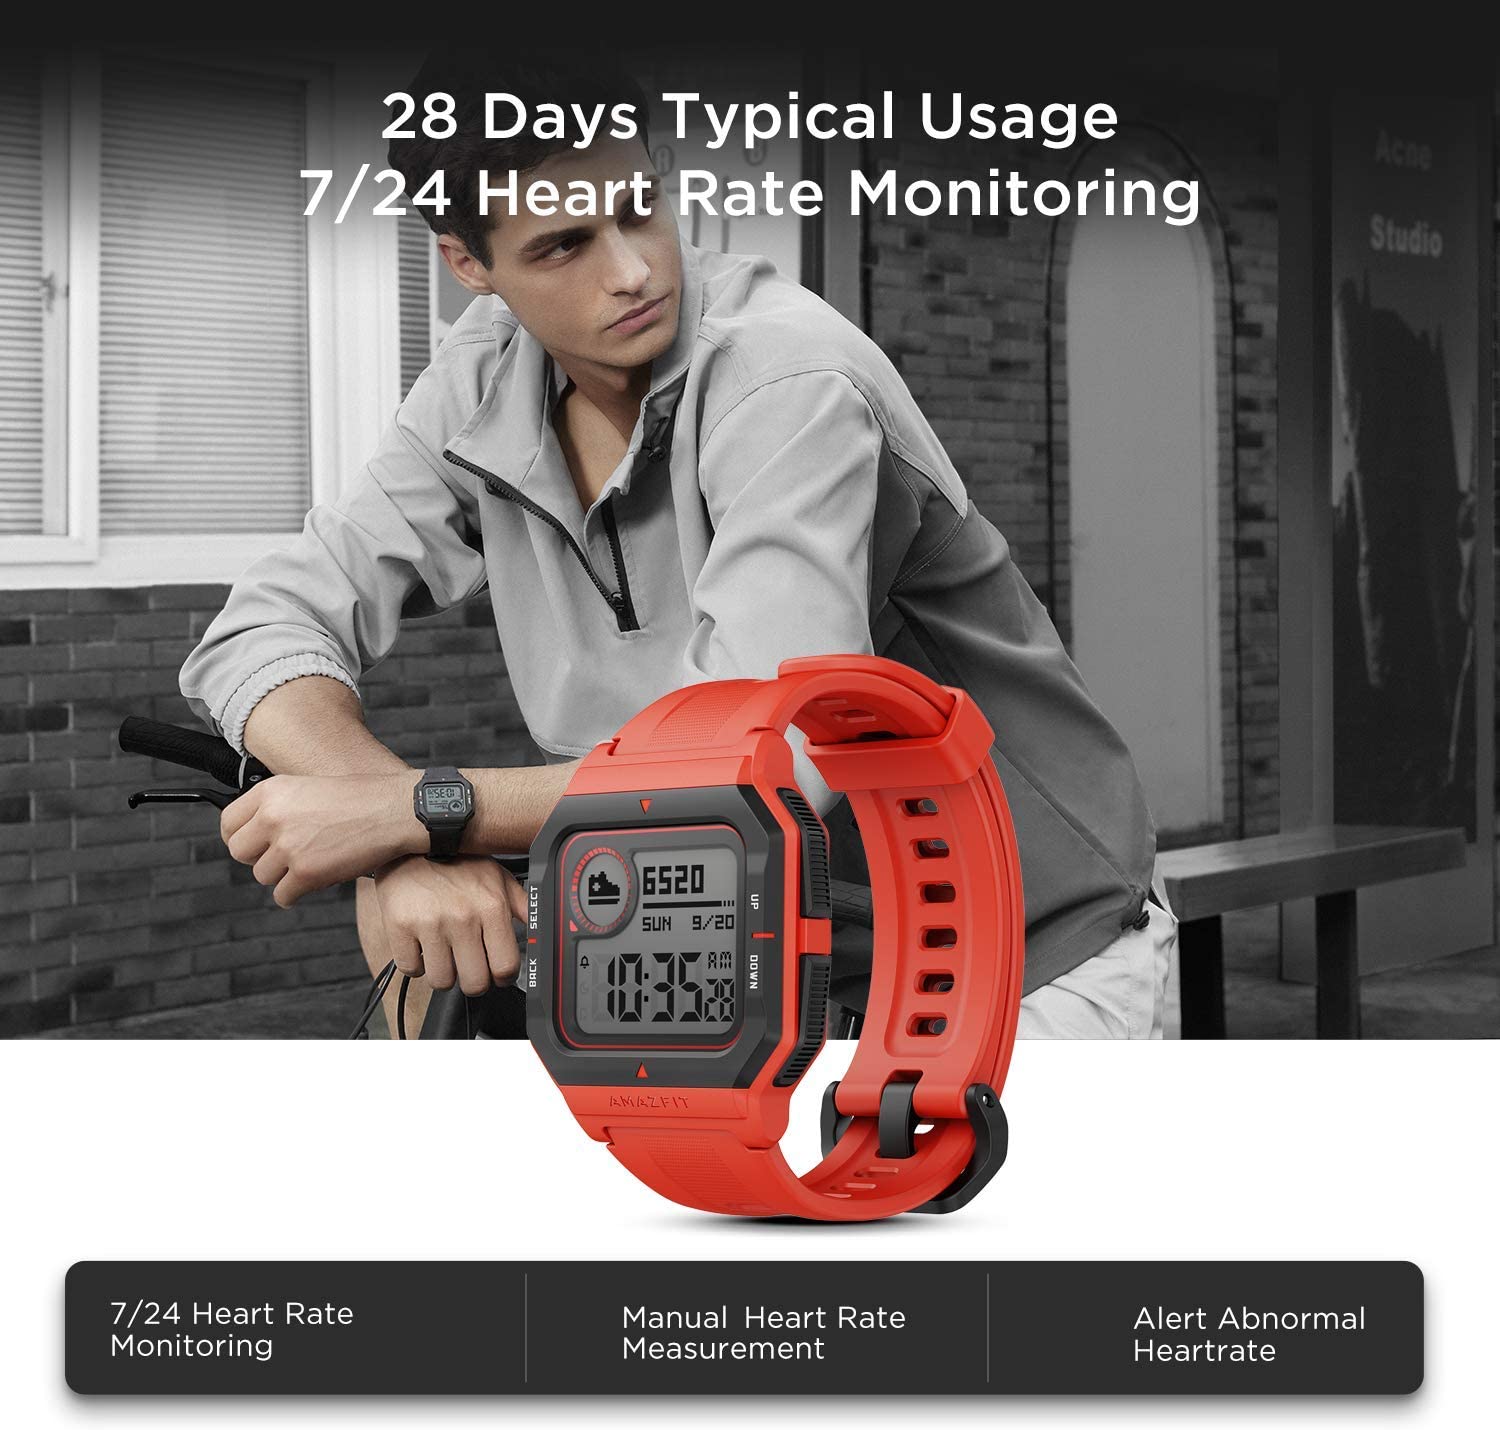 Amazfit Neo Fitness Retro Smartwatch with Real-Time Workout Tracking, Heart Rate and Sleep Monitoring, 28-Day Battery Life, Smart Notifications, 1.2" Always-On Display, Water Resistant, Red